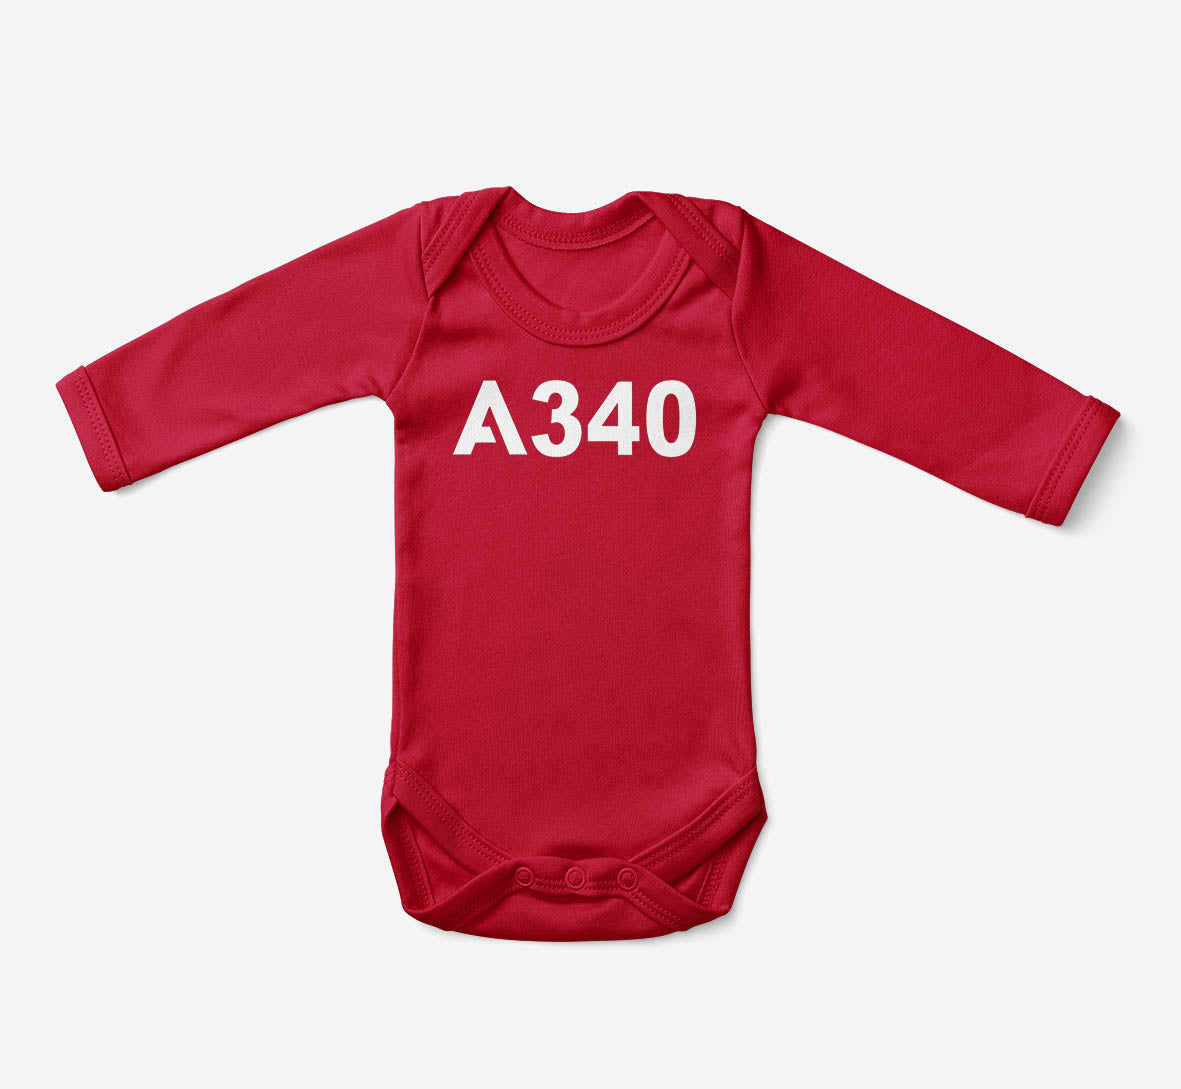 A320neo & Text Designed Baby Bodysuits (Copy)